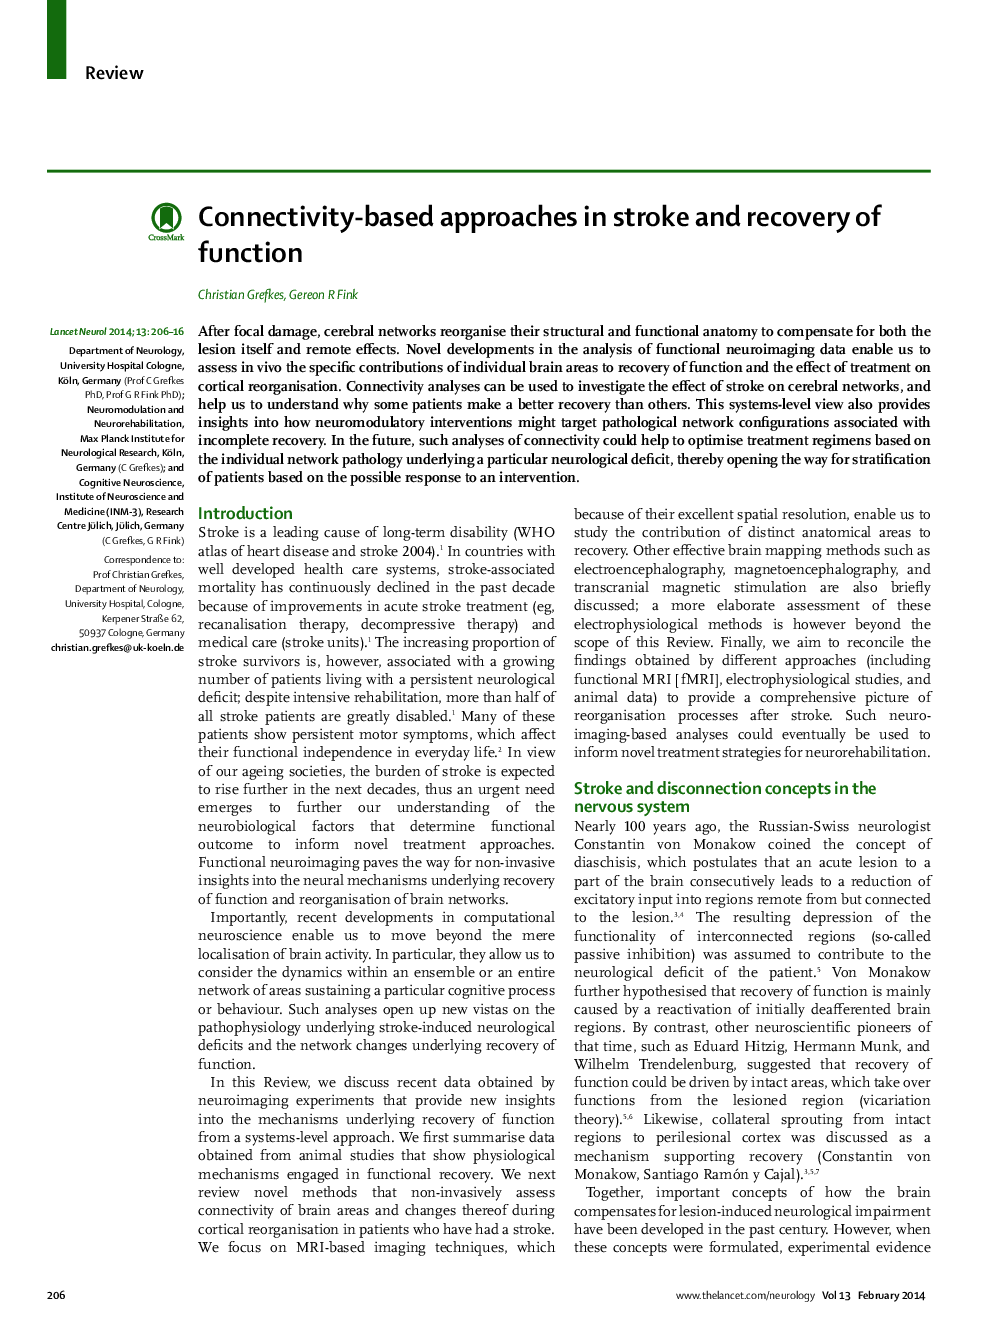 Connectivity-based approaches in stroke and recovery of function